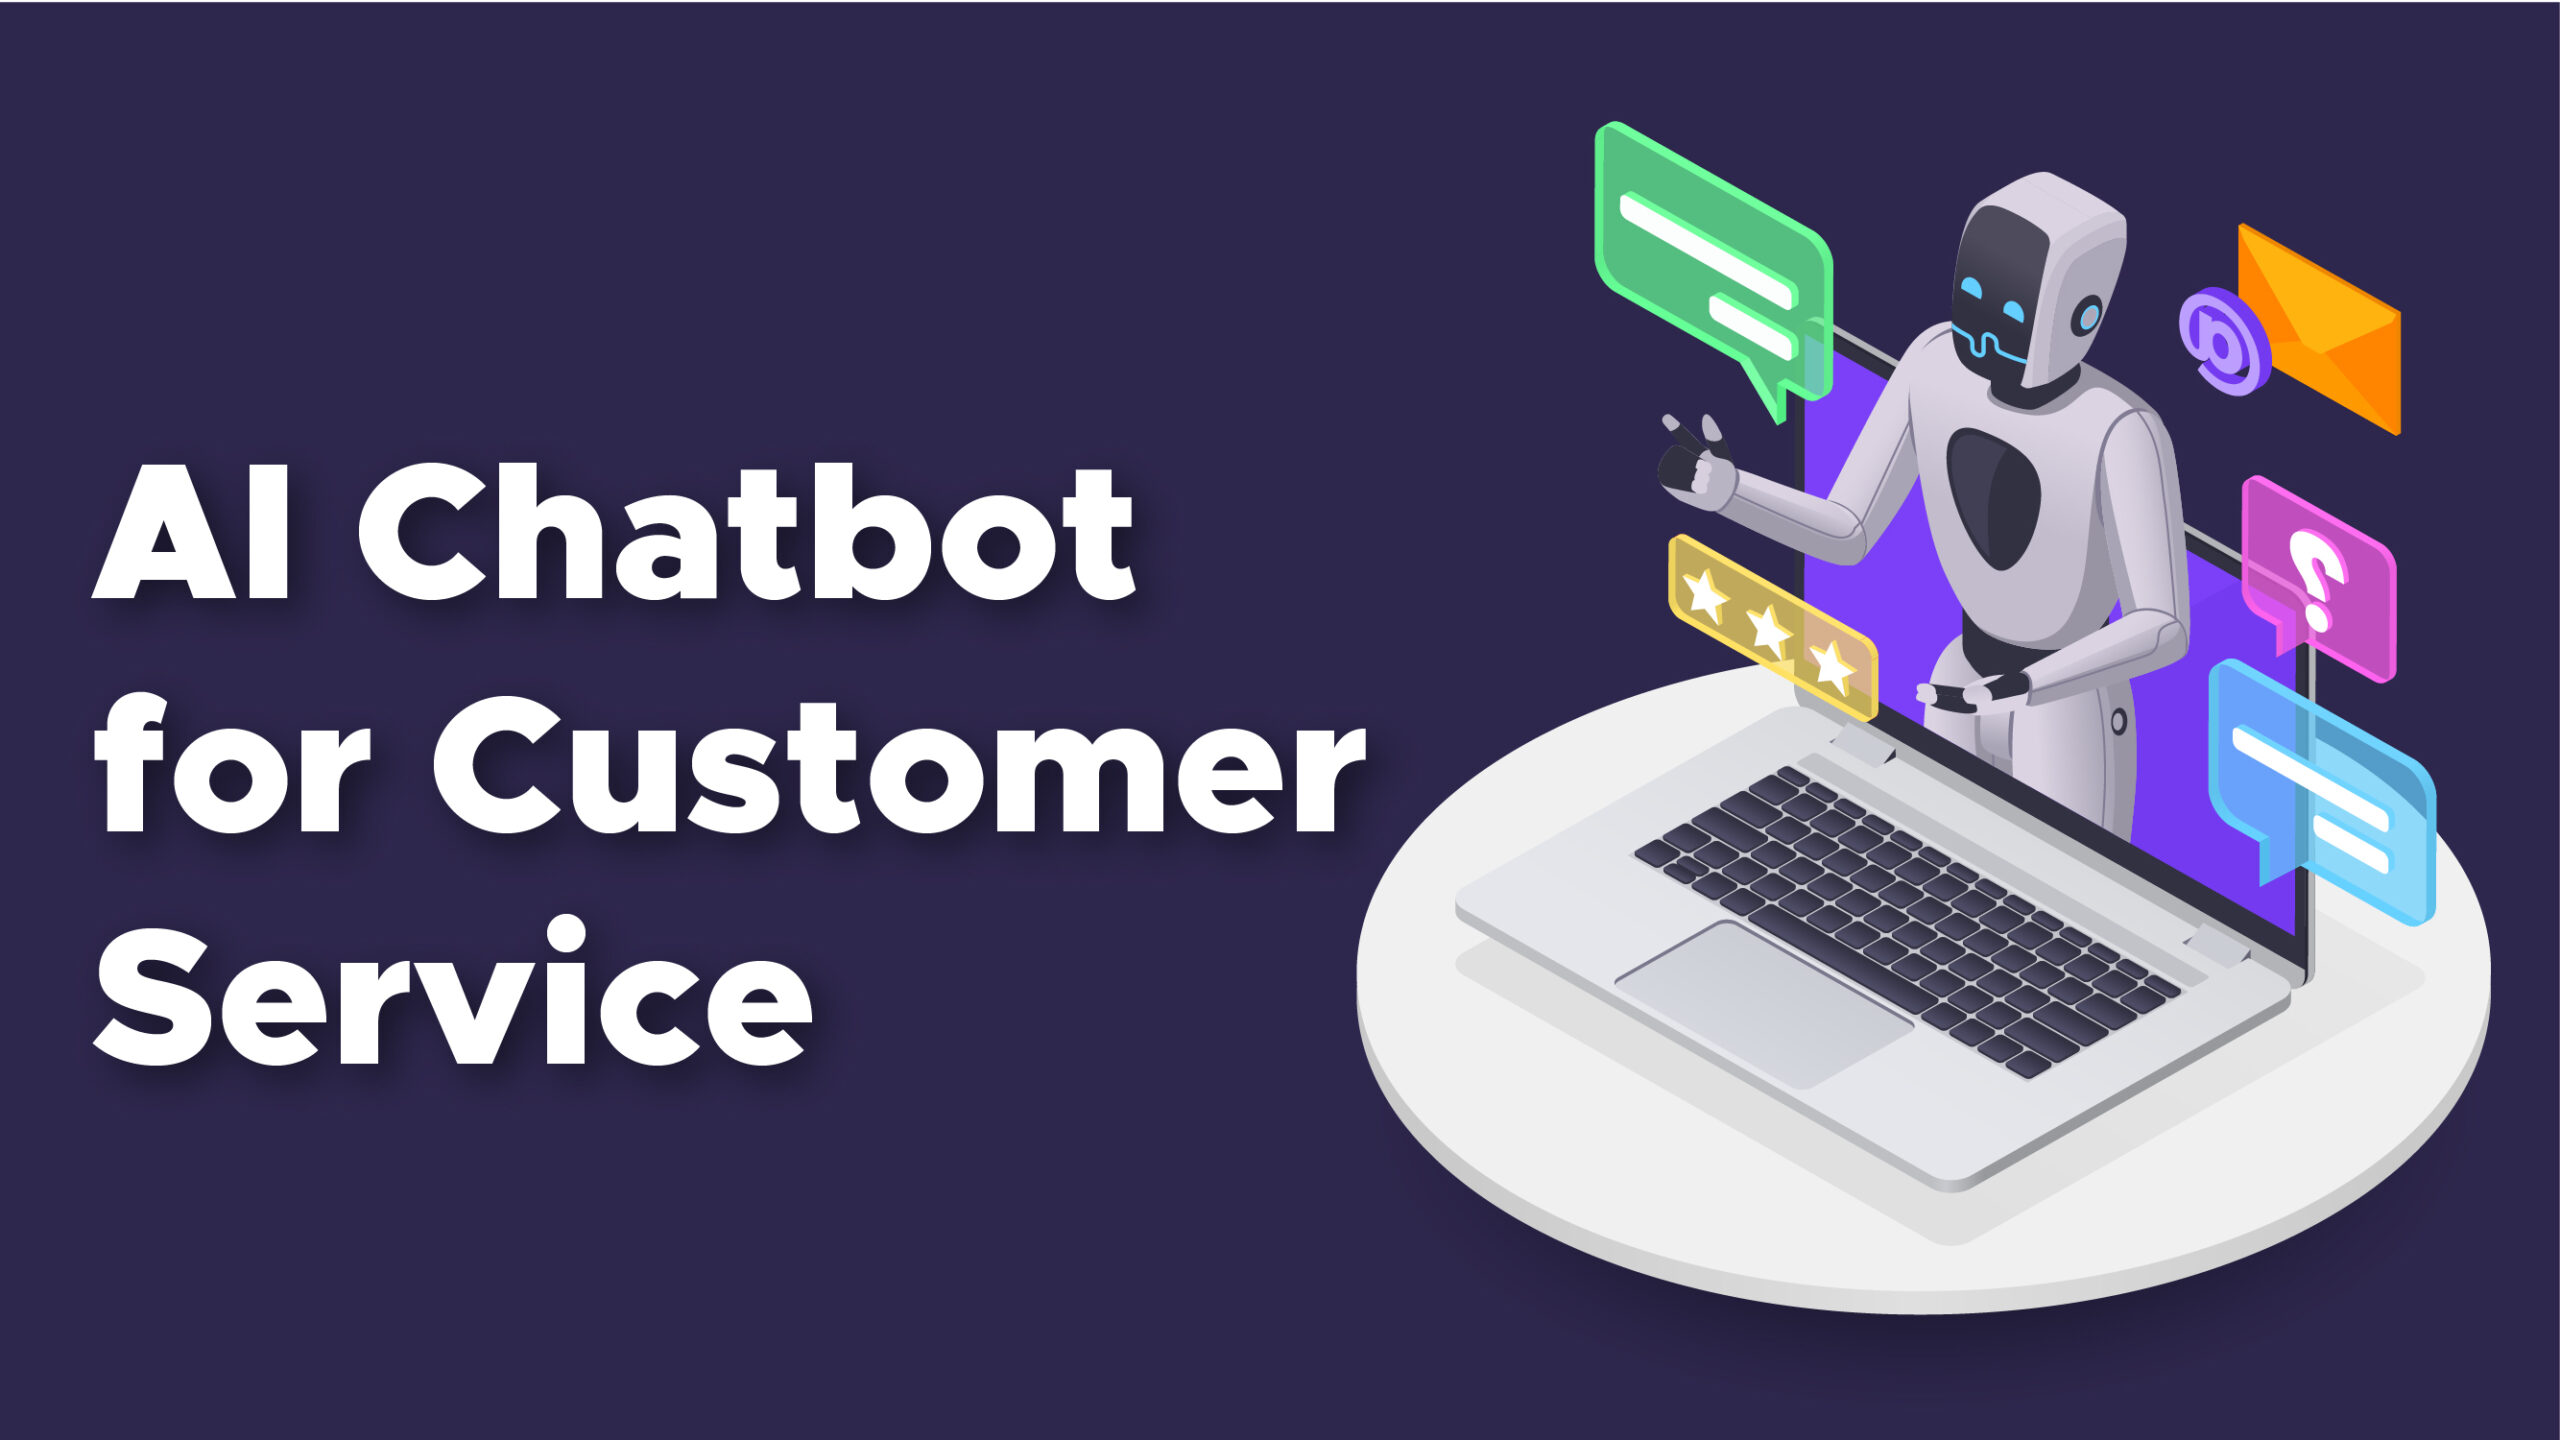 AI Chatbot for Customer Service - AI Customer Service Tools and Software